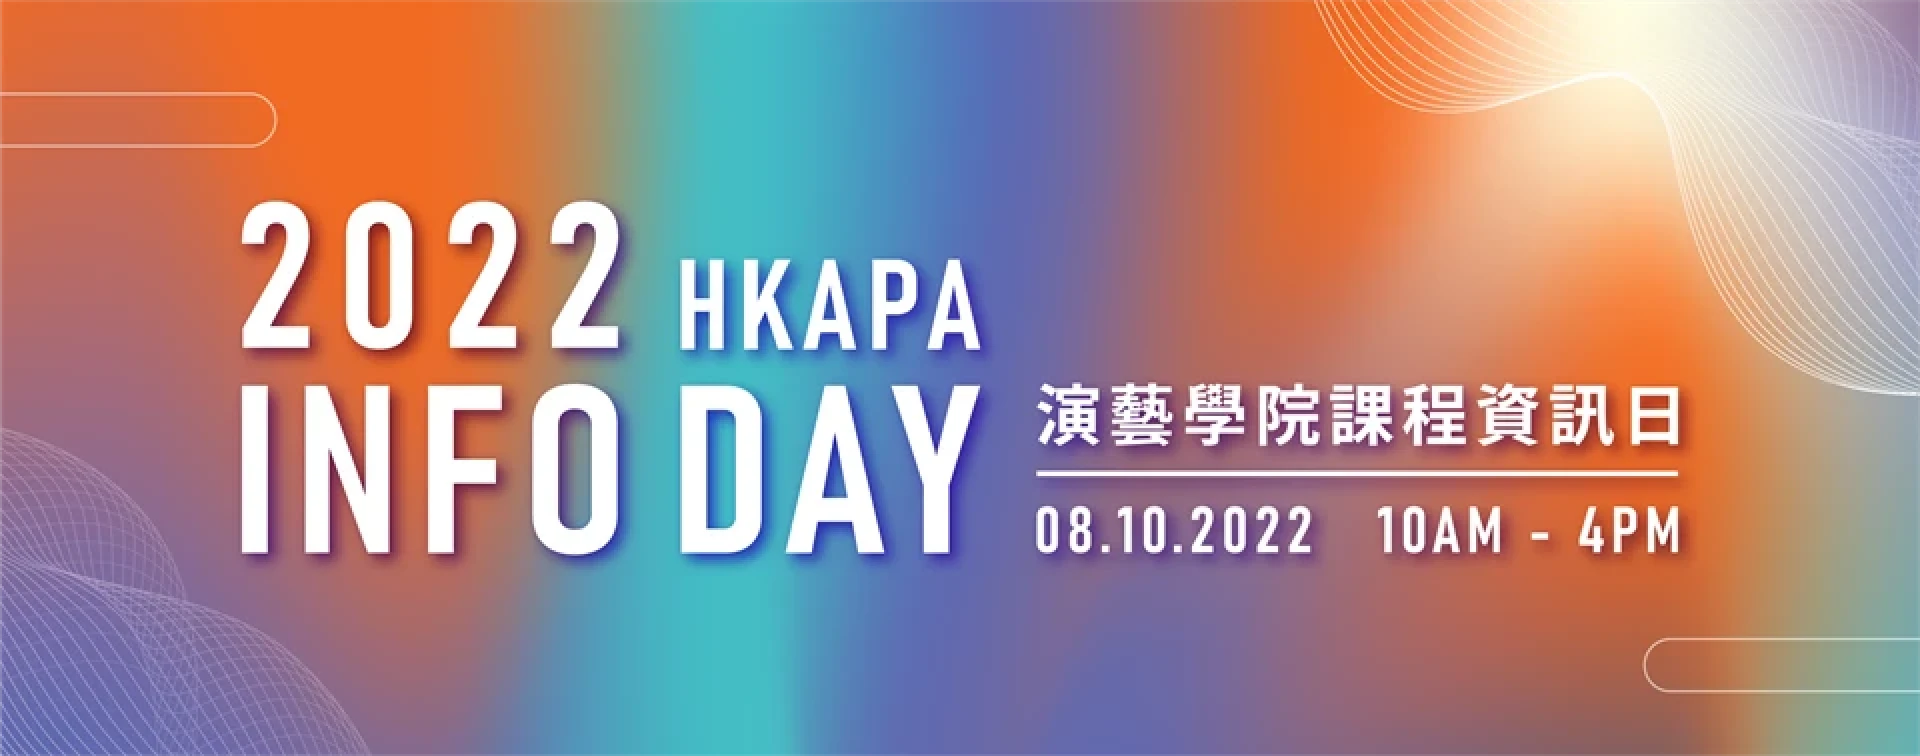 Info Day 2022 on 8 October!